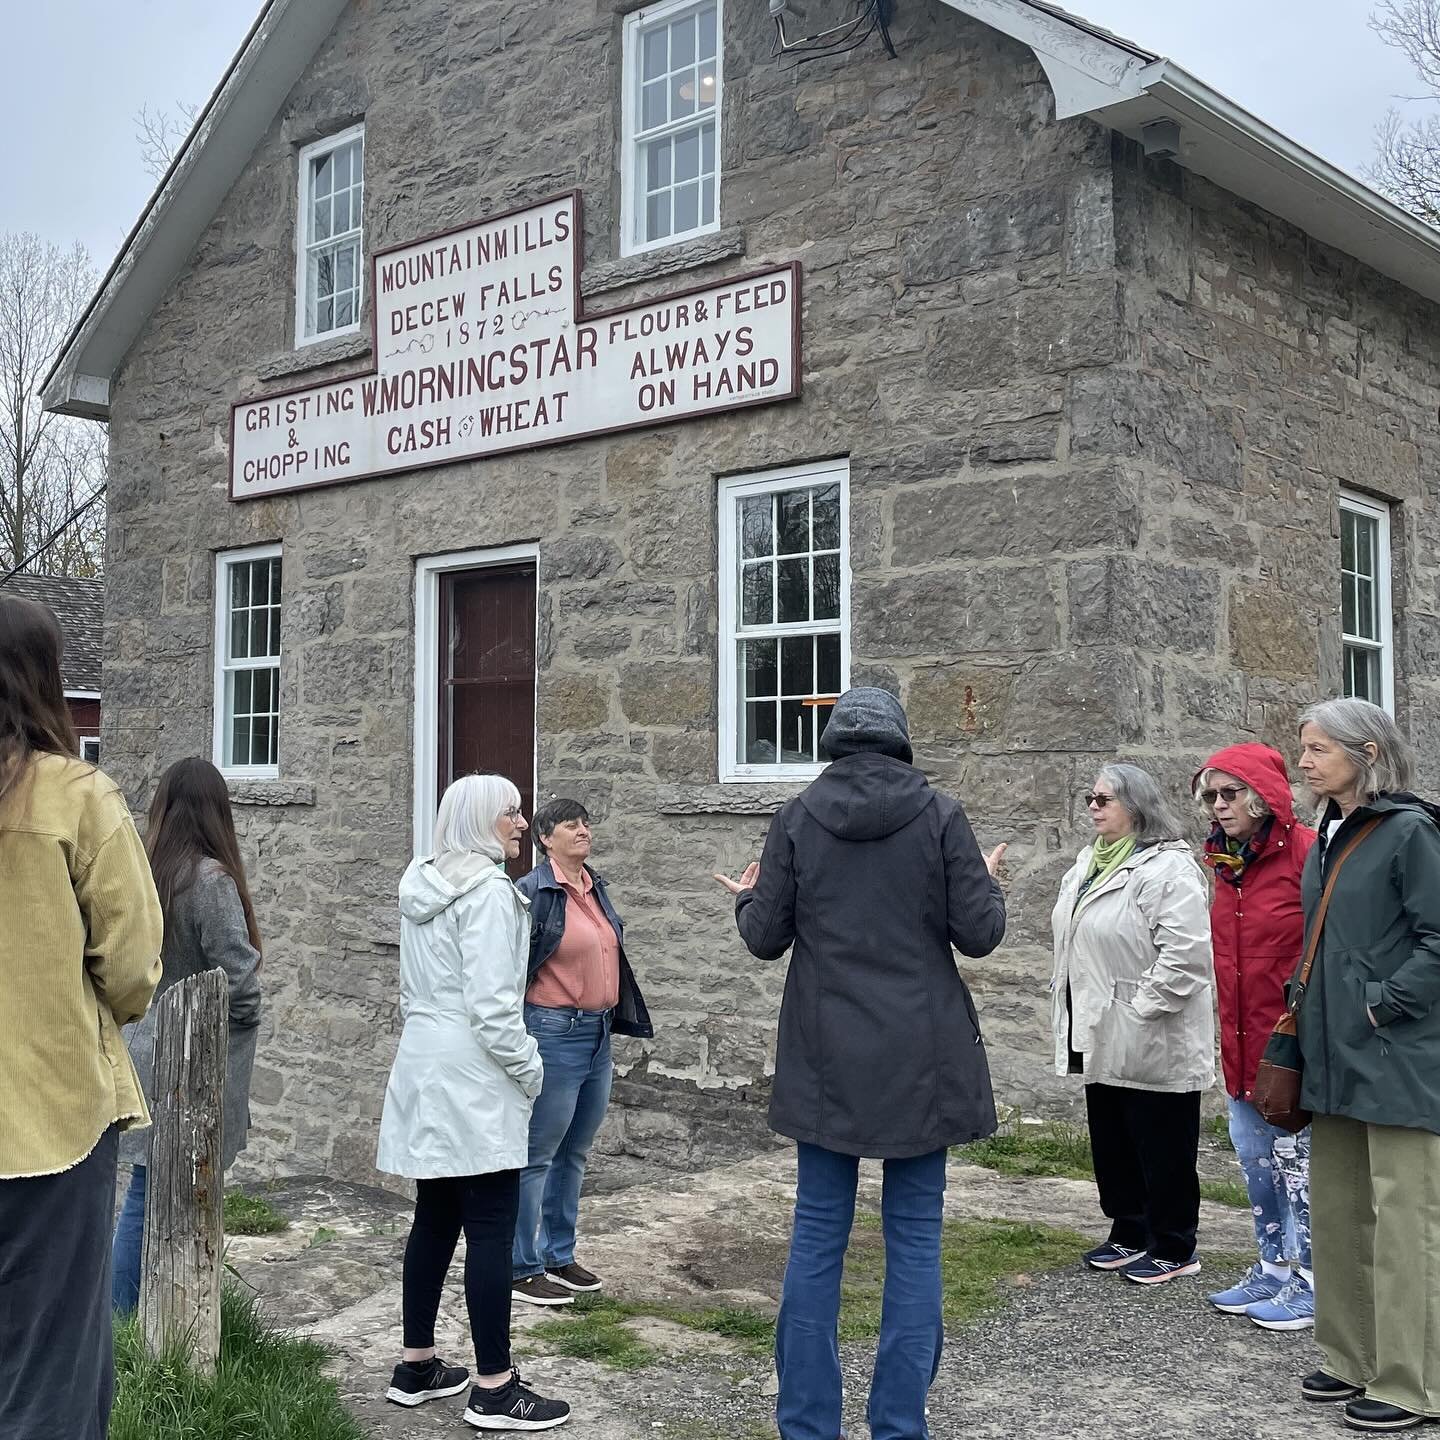 We had a great visit with our friends up the road at @morningstar.mill last week!

Carla, Hank, Terry and the rest were excellent hosts as they toured us through the restored (and operational!) 1872 mill and the home on the property. Our staff and vo